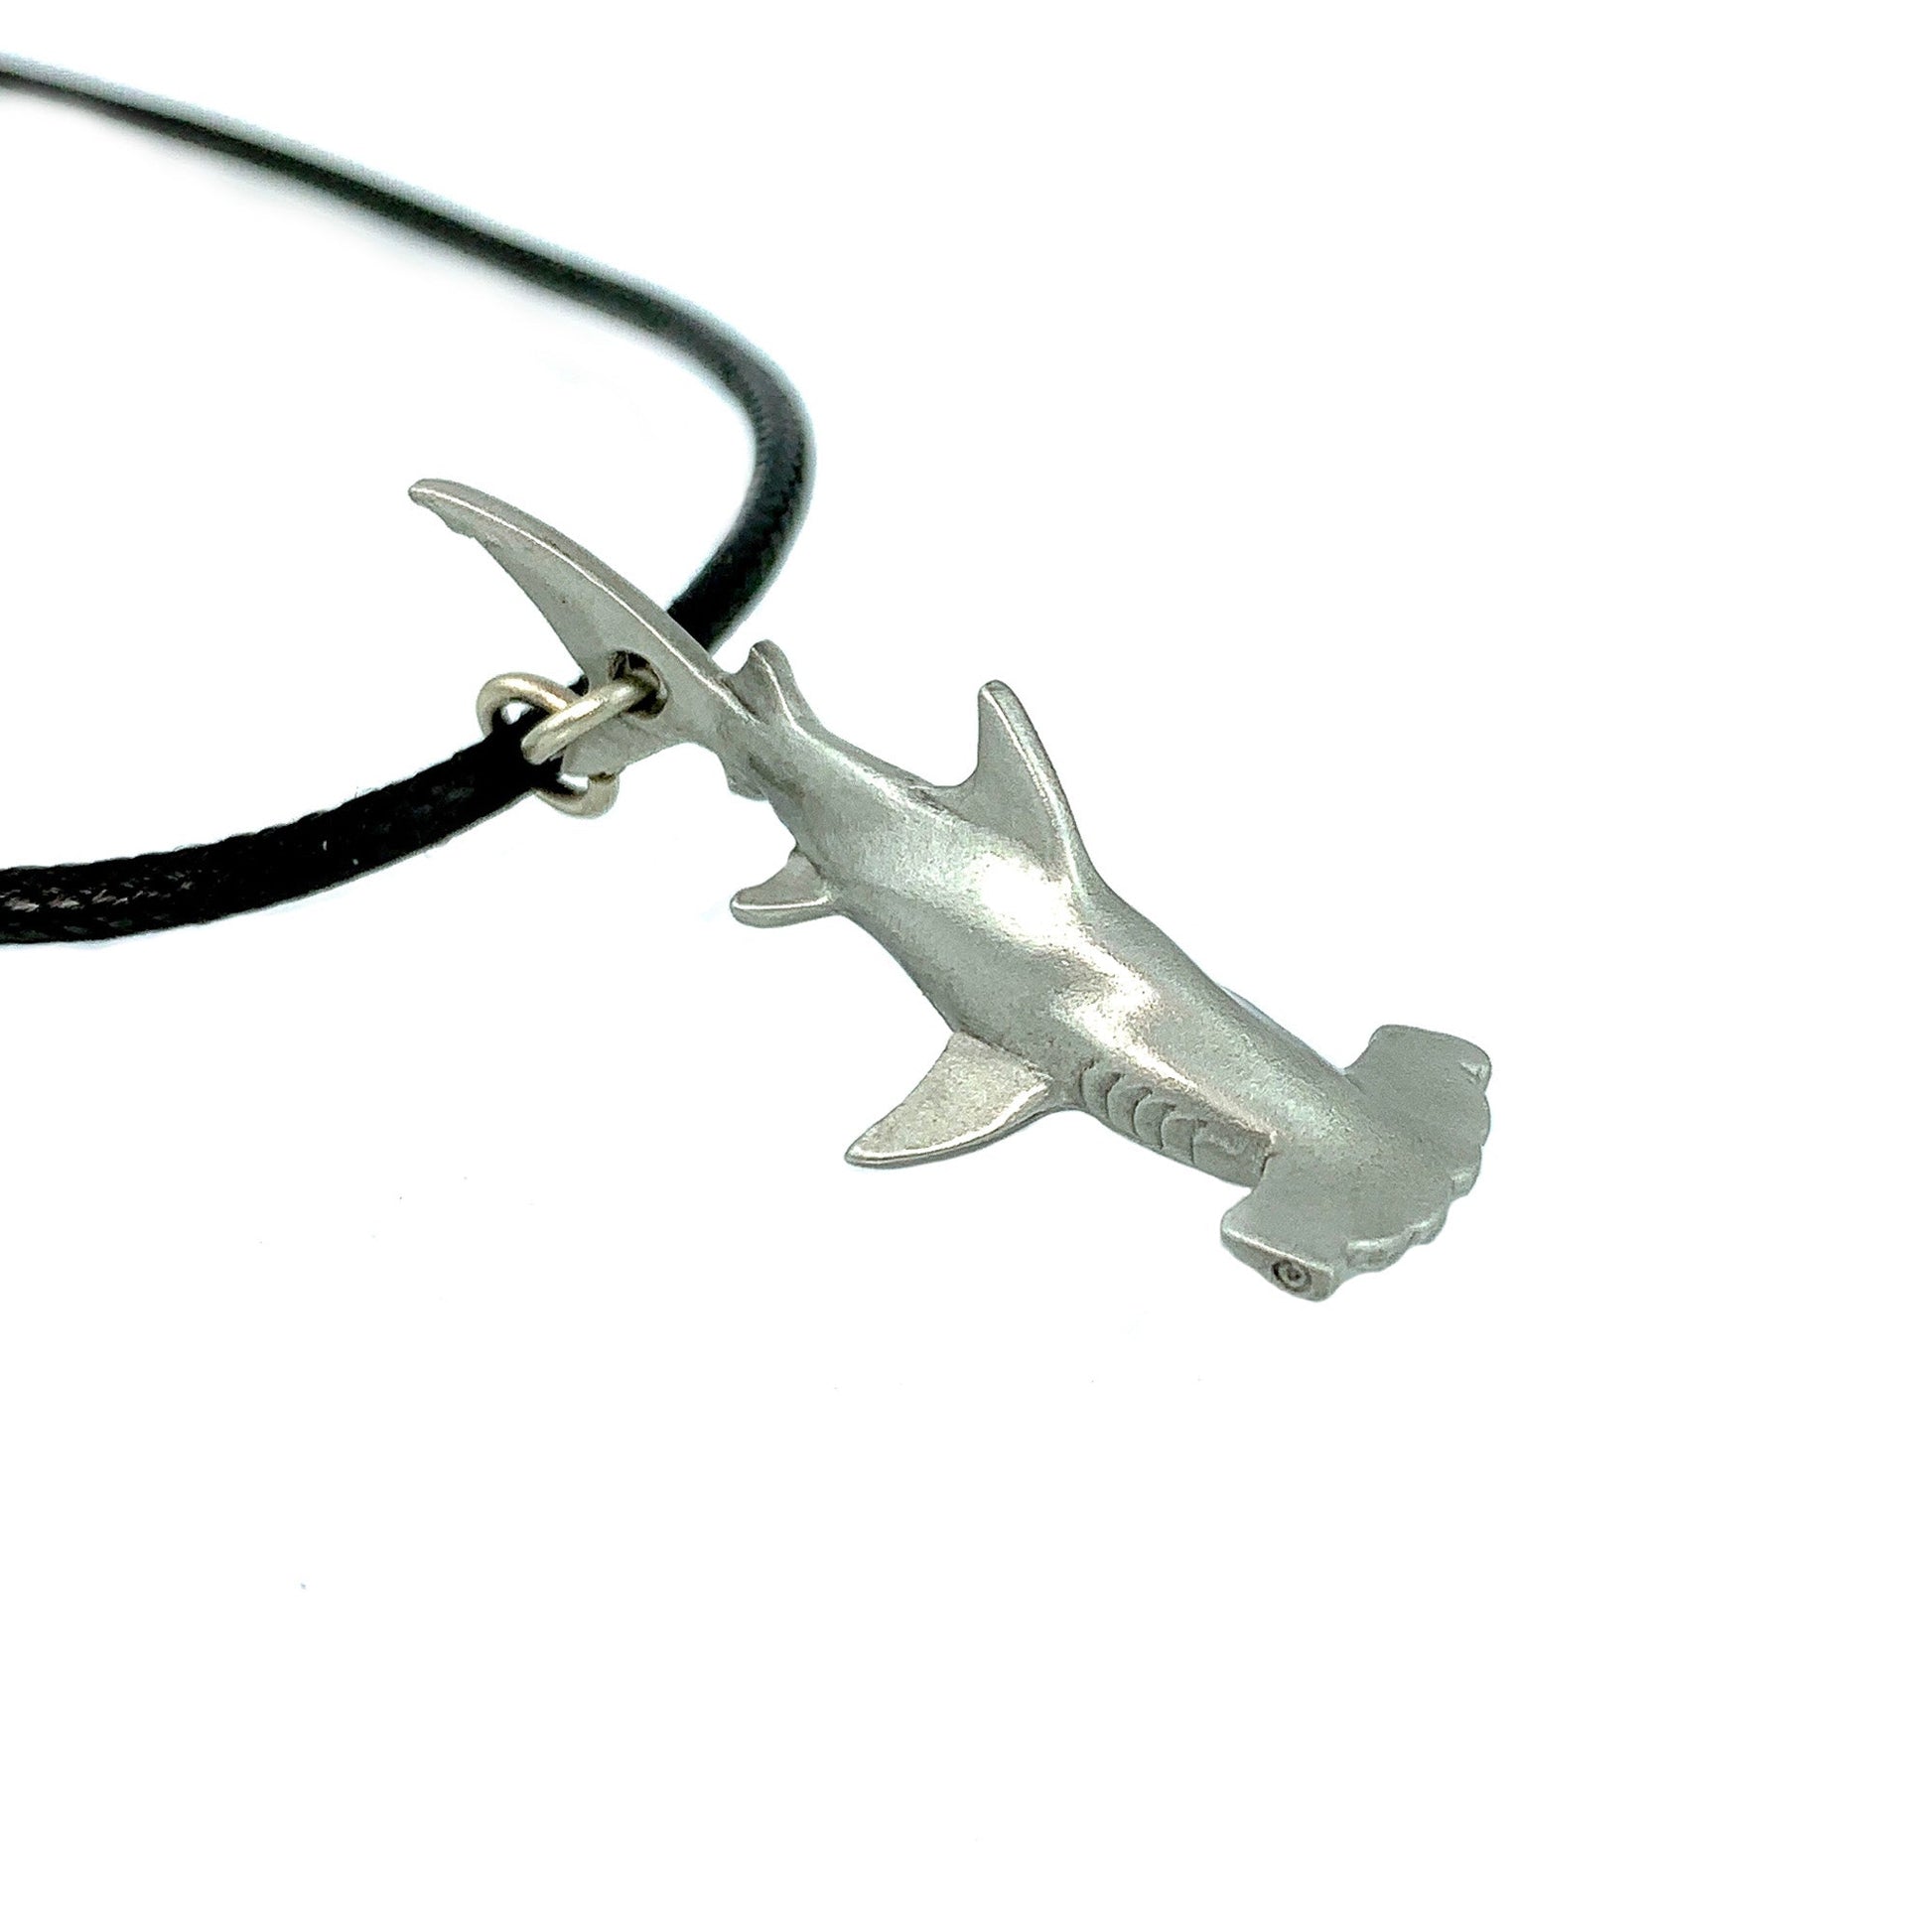 Hammerhead Shark Necklace- Shark Gifts for Women and Men, Realistic Hammerhead Shark, Gifts for Shark Lovers, Sea Life Jewelry, Realistic Shark Charm - The Tool Store